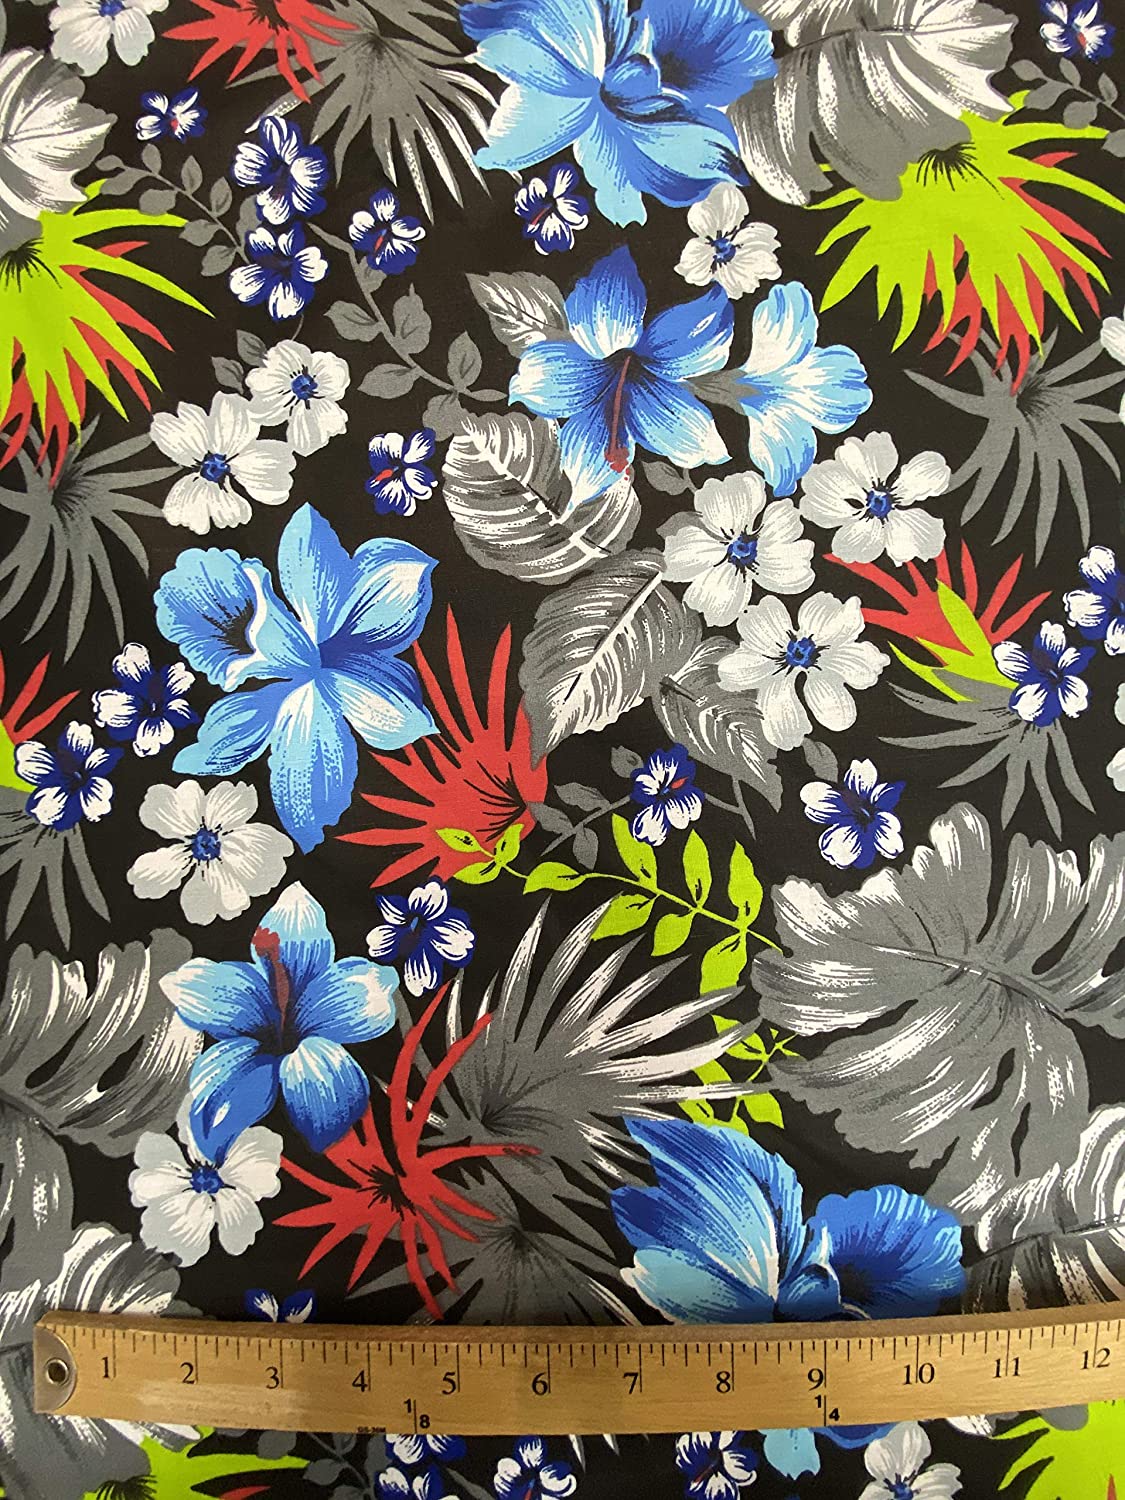 65% Polyester 35% Cotton Hawaiian Print Poly/Cotton Fabric, Good for Face Mask Covers (Grey on Black, 1 Yard)